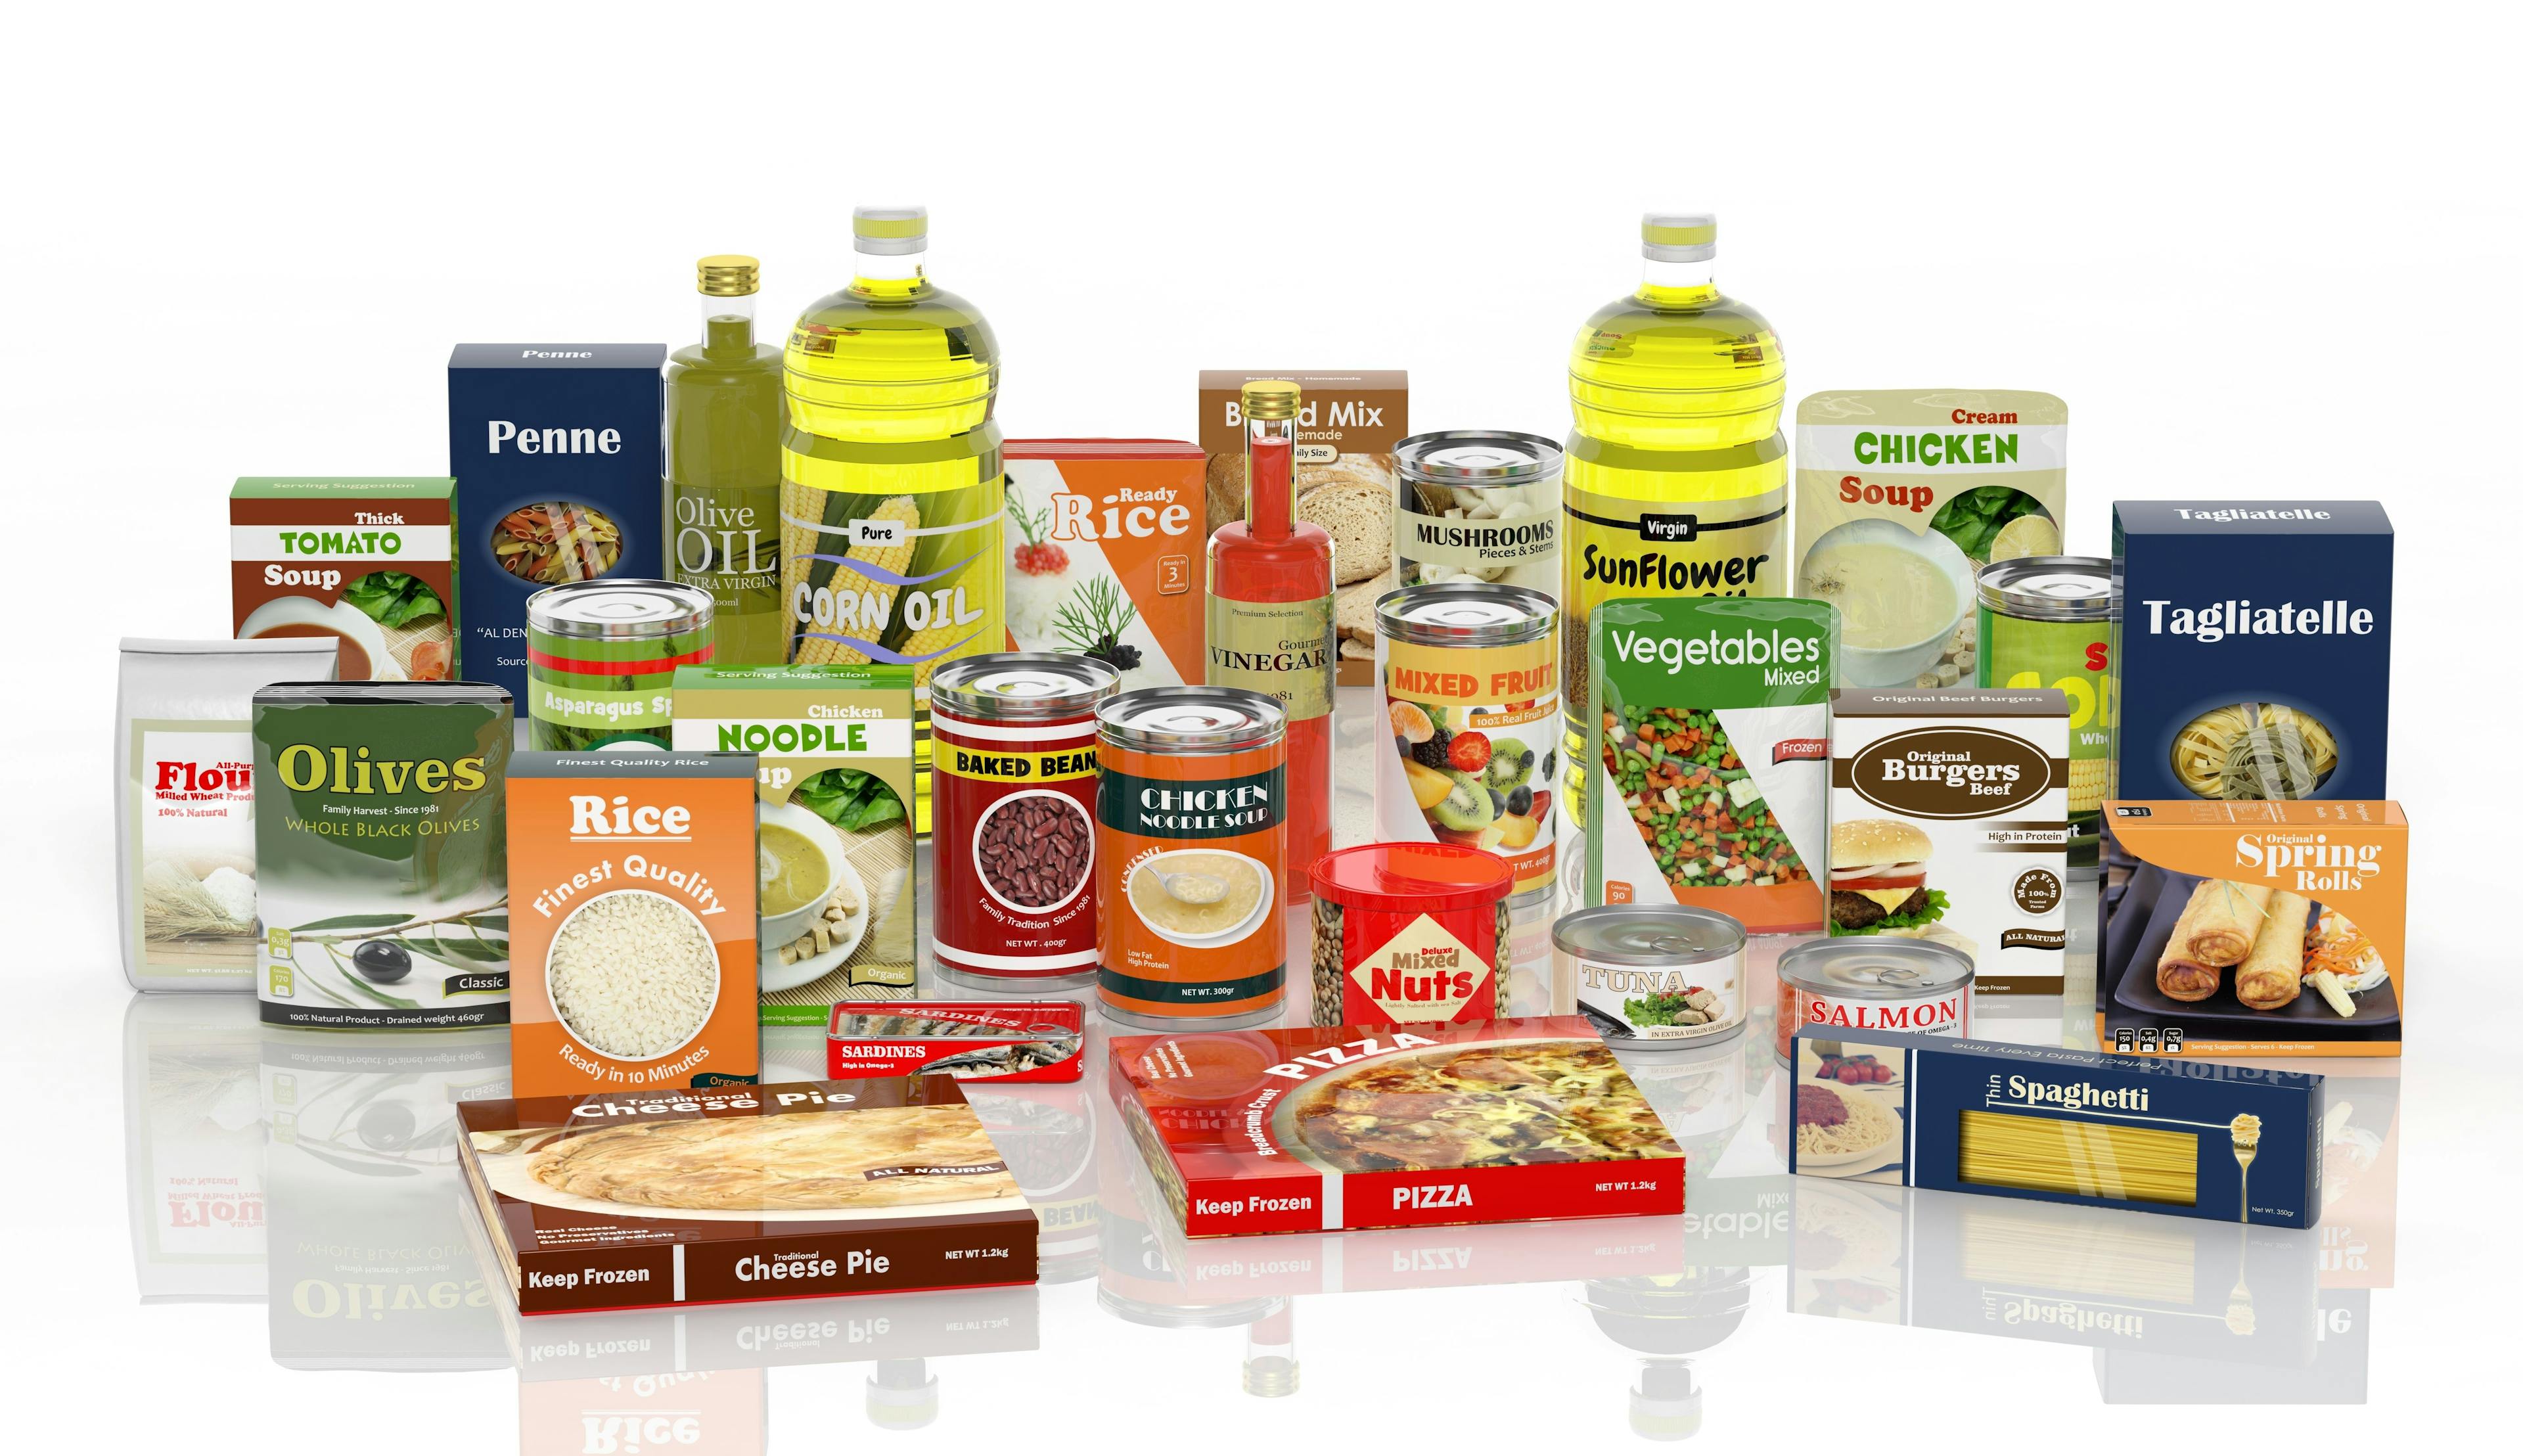 3D collection of packaged food isolated on white background | Image Credit: © viperagp - stock.adobe.com